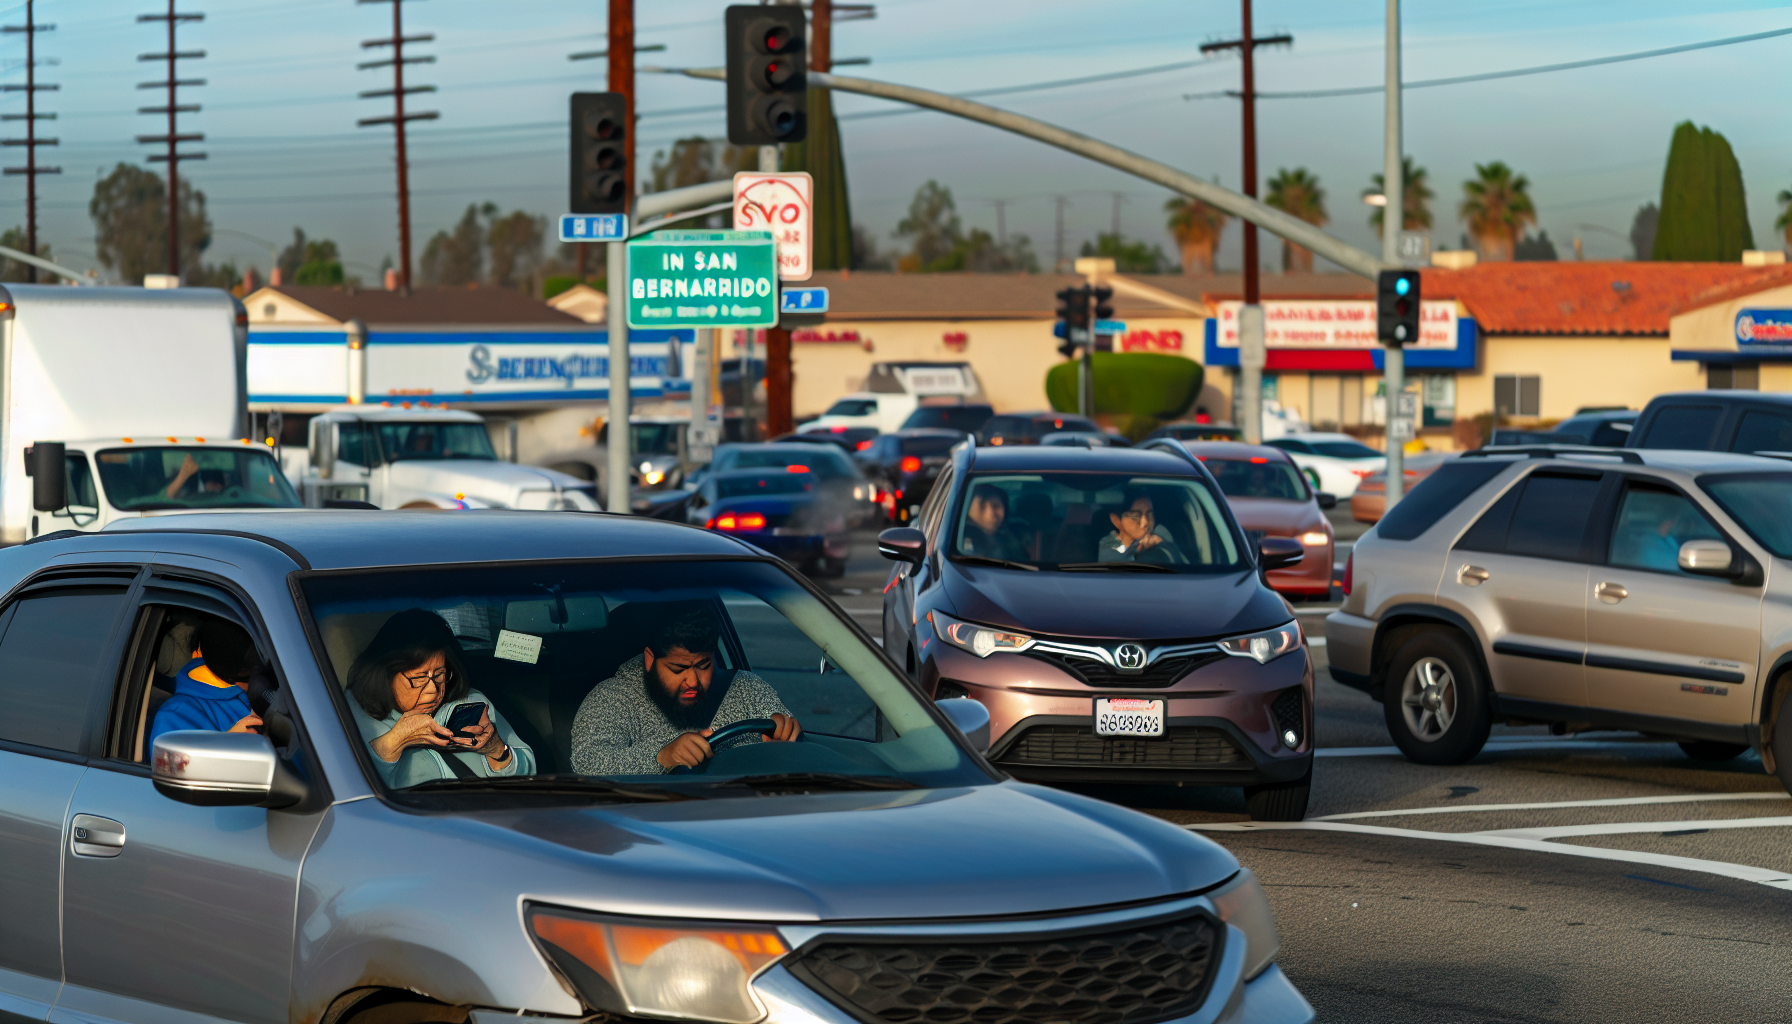 Common causes of car accidents in San Bernardino include driver negligence, distracted driving, and hazardous road conditions